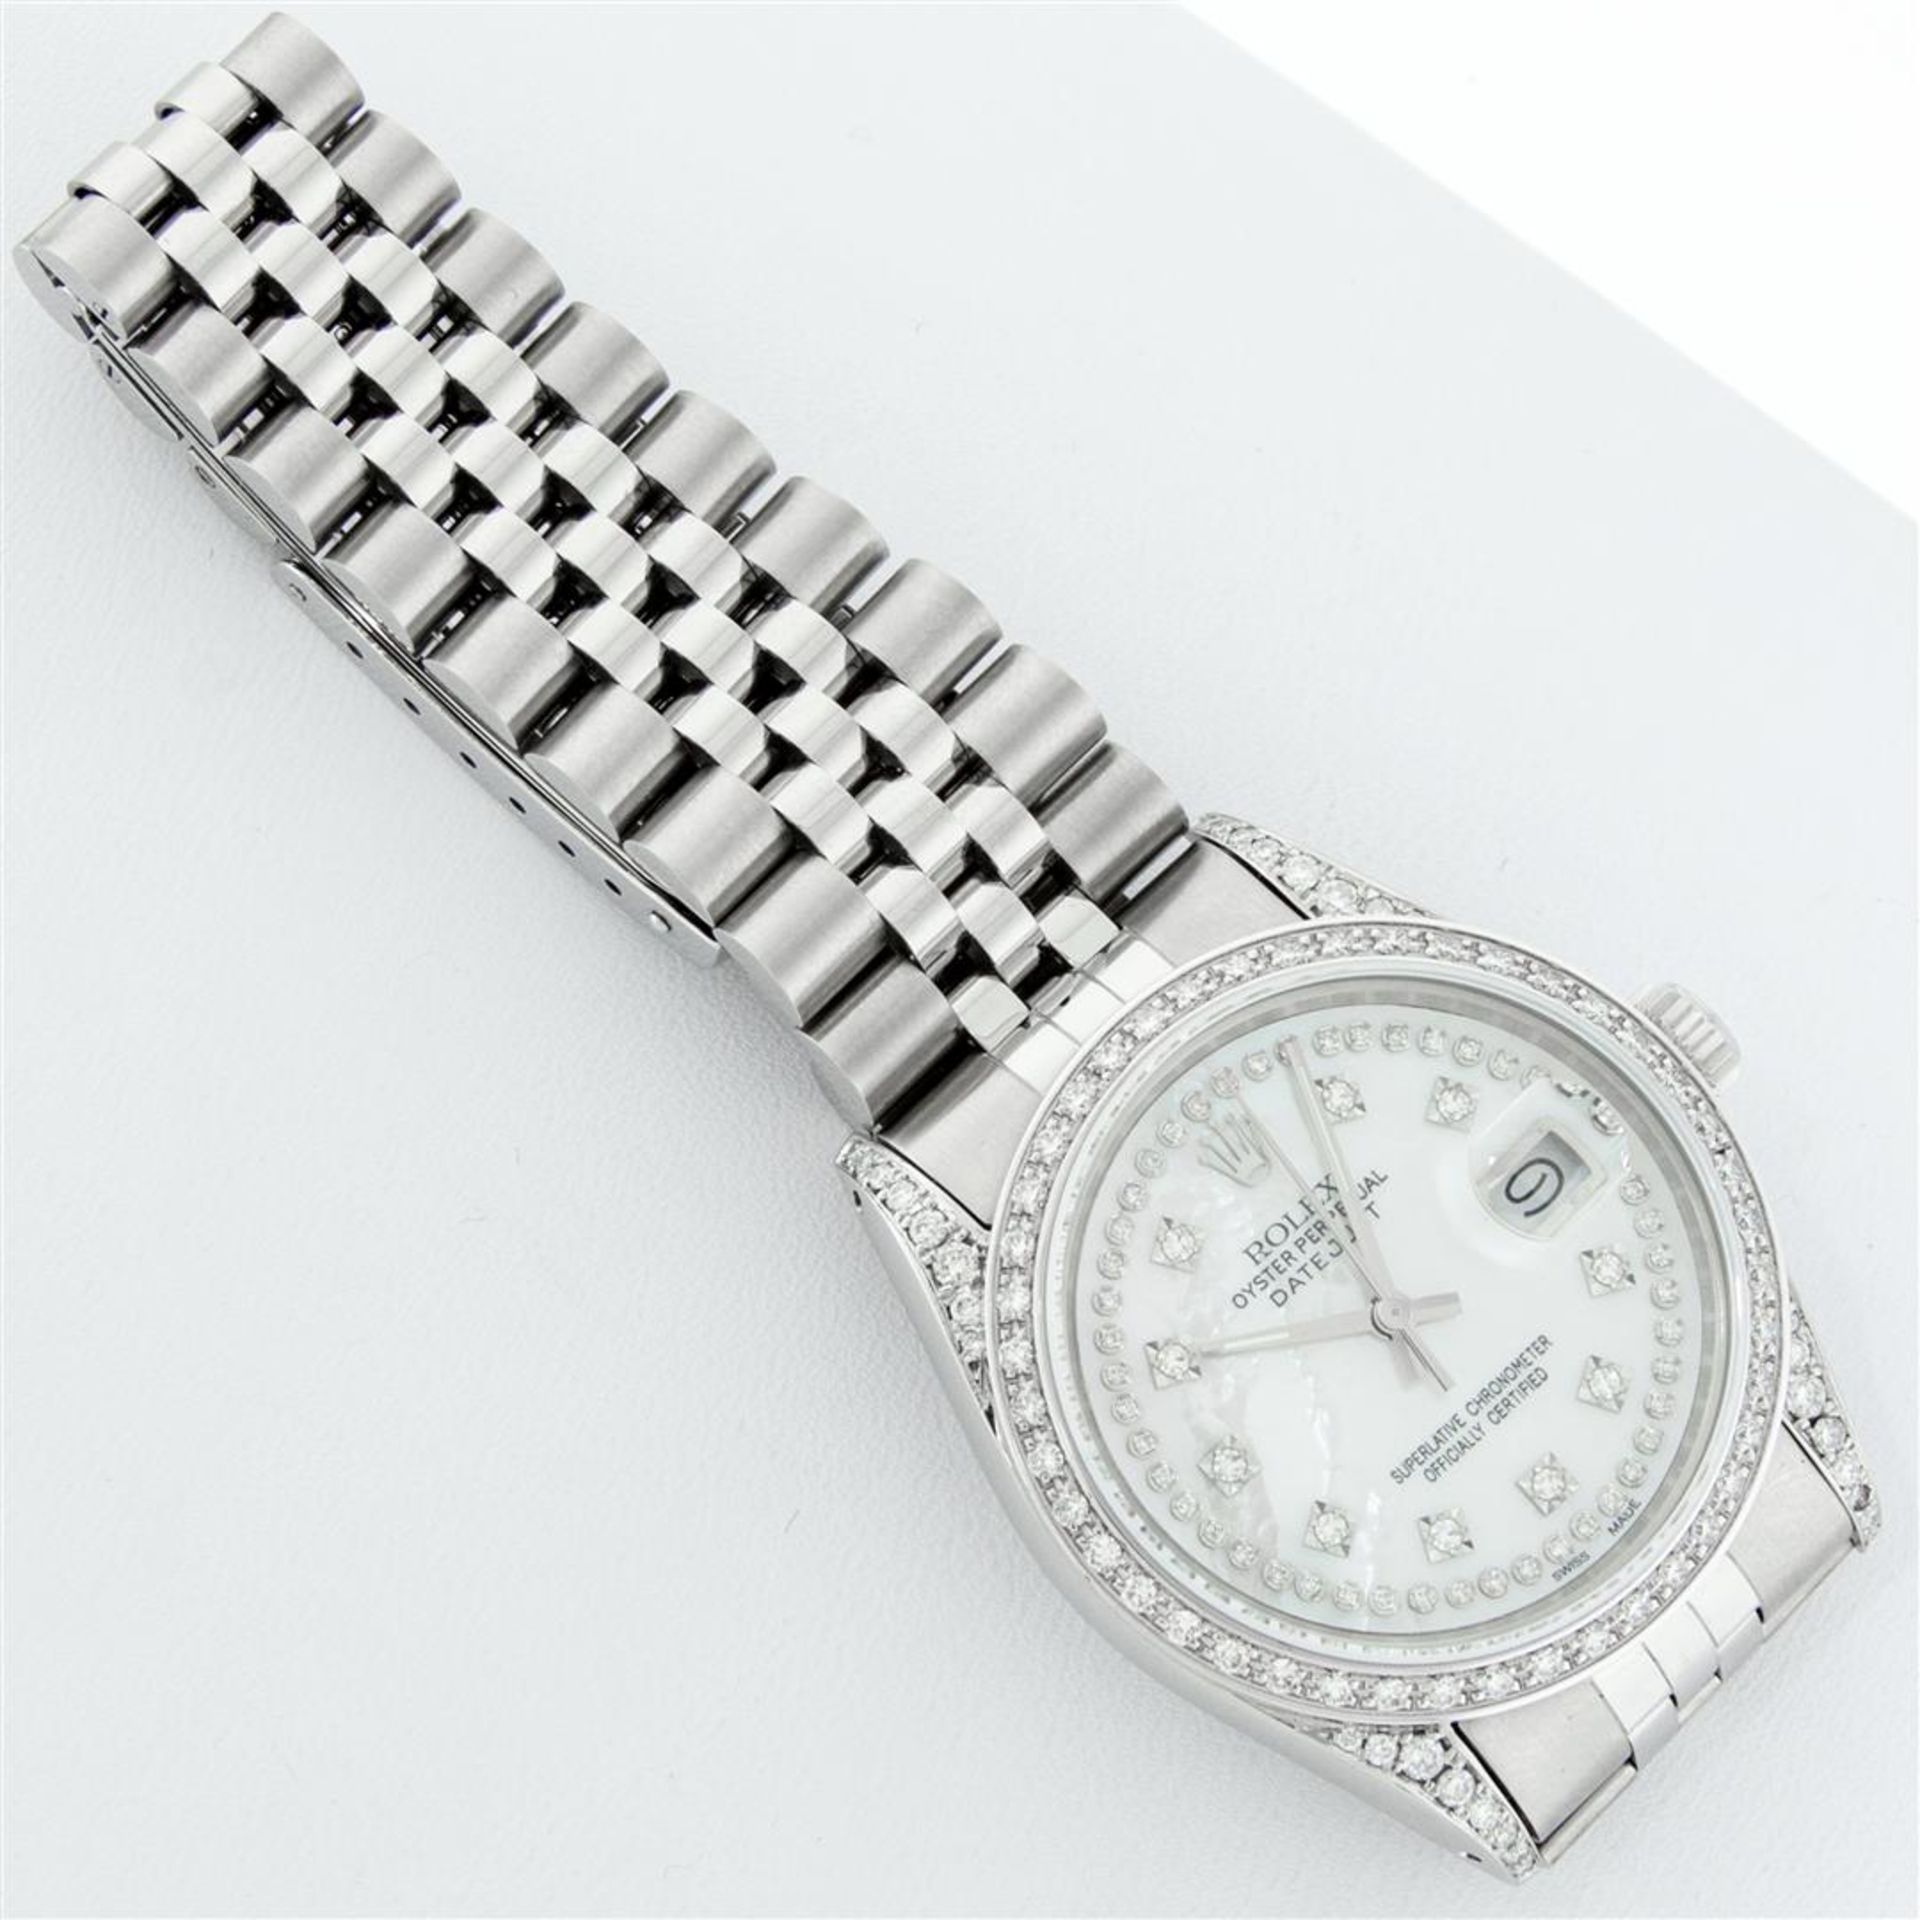 Rolex Mens Stainless Steel Mother Of Pearl Diamond Lugs Datejust Wristwatch - Image 6 of 9